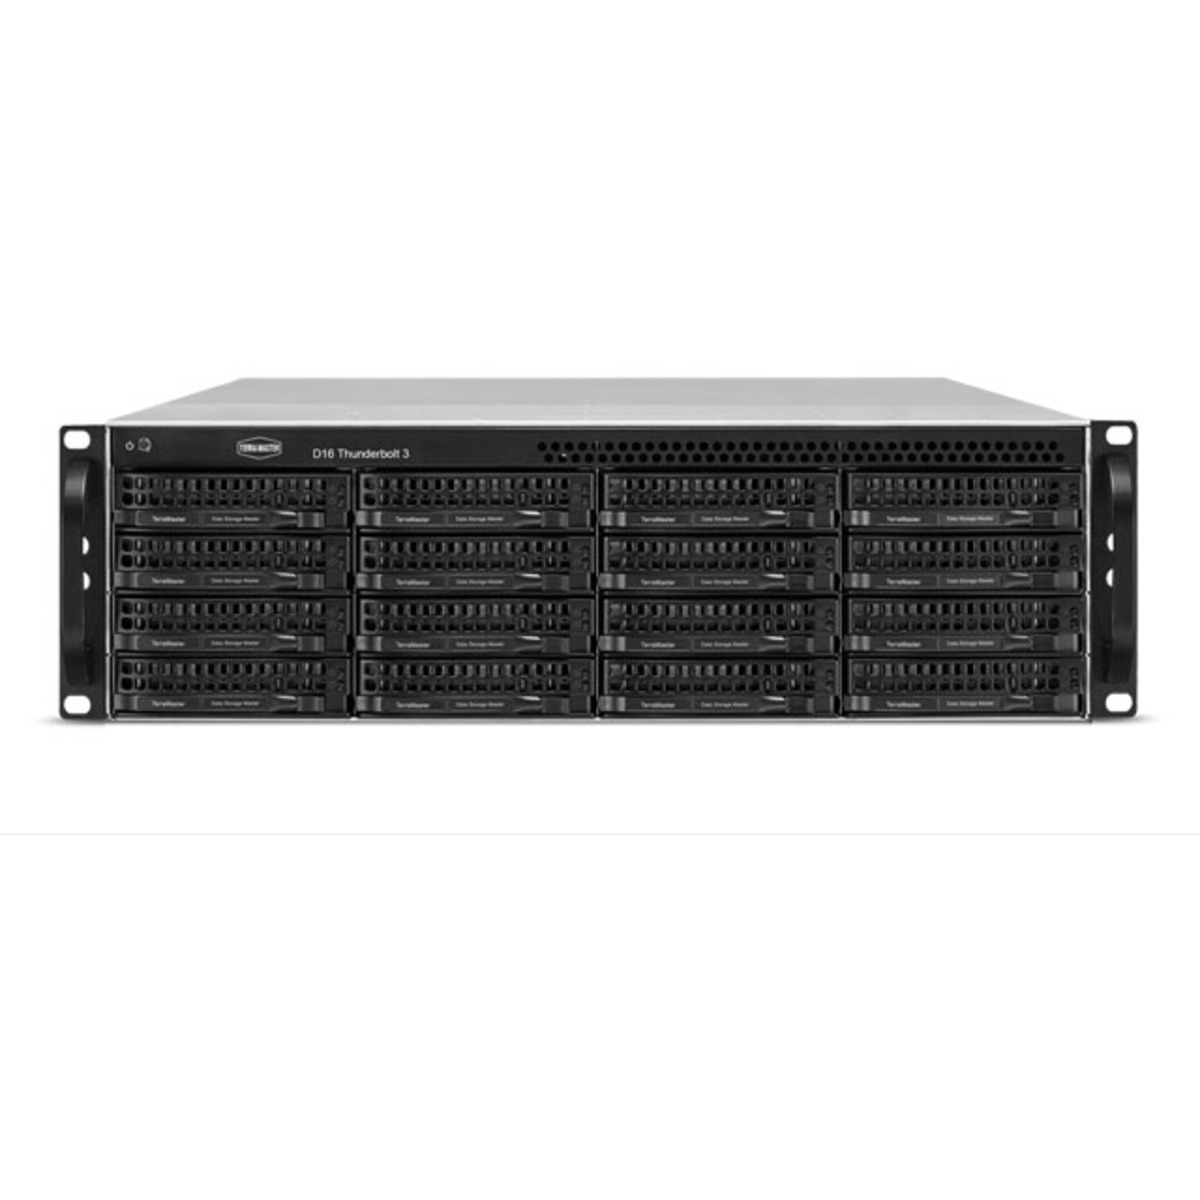 TerraMaster D16 Thunderbolt 3 52tb 16-Bay RackMount Multimedia / Power User / Business DAS - Direct Attached Storage Device 13x4tb Crucial MX500 CT4000MX500SSD1 2.5 560/510MB/s SATA 6Gb/s SSD CONSUMER Class Drives Installed - Burn-In Tested D16 Thunderbolt 3